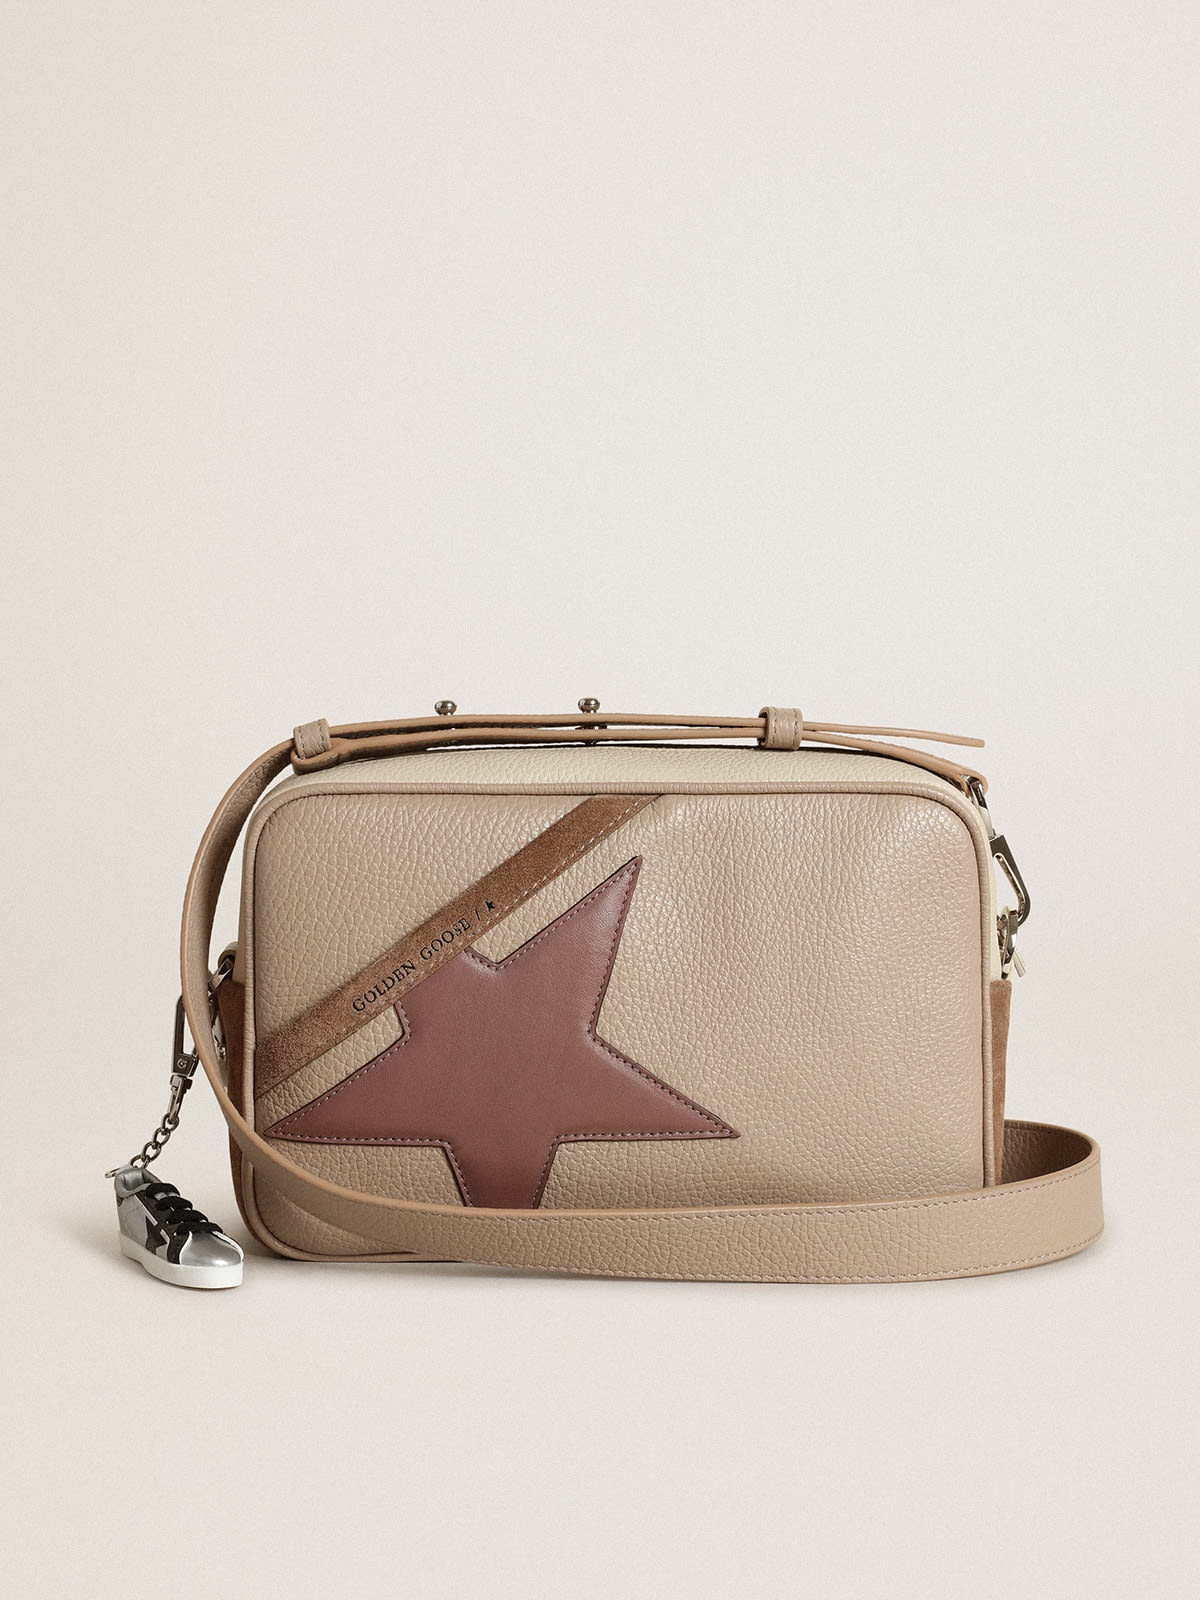 Large Star Bag in off-white hammered leather and cappuccino-colored suede with purple leather star - 1